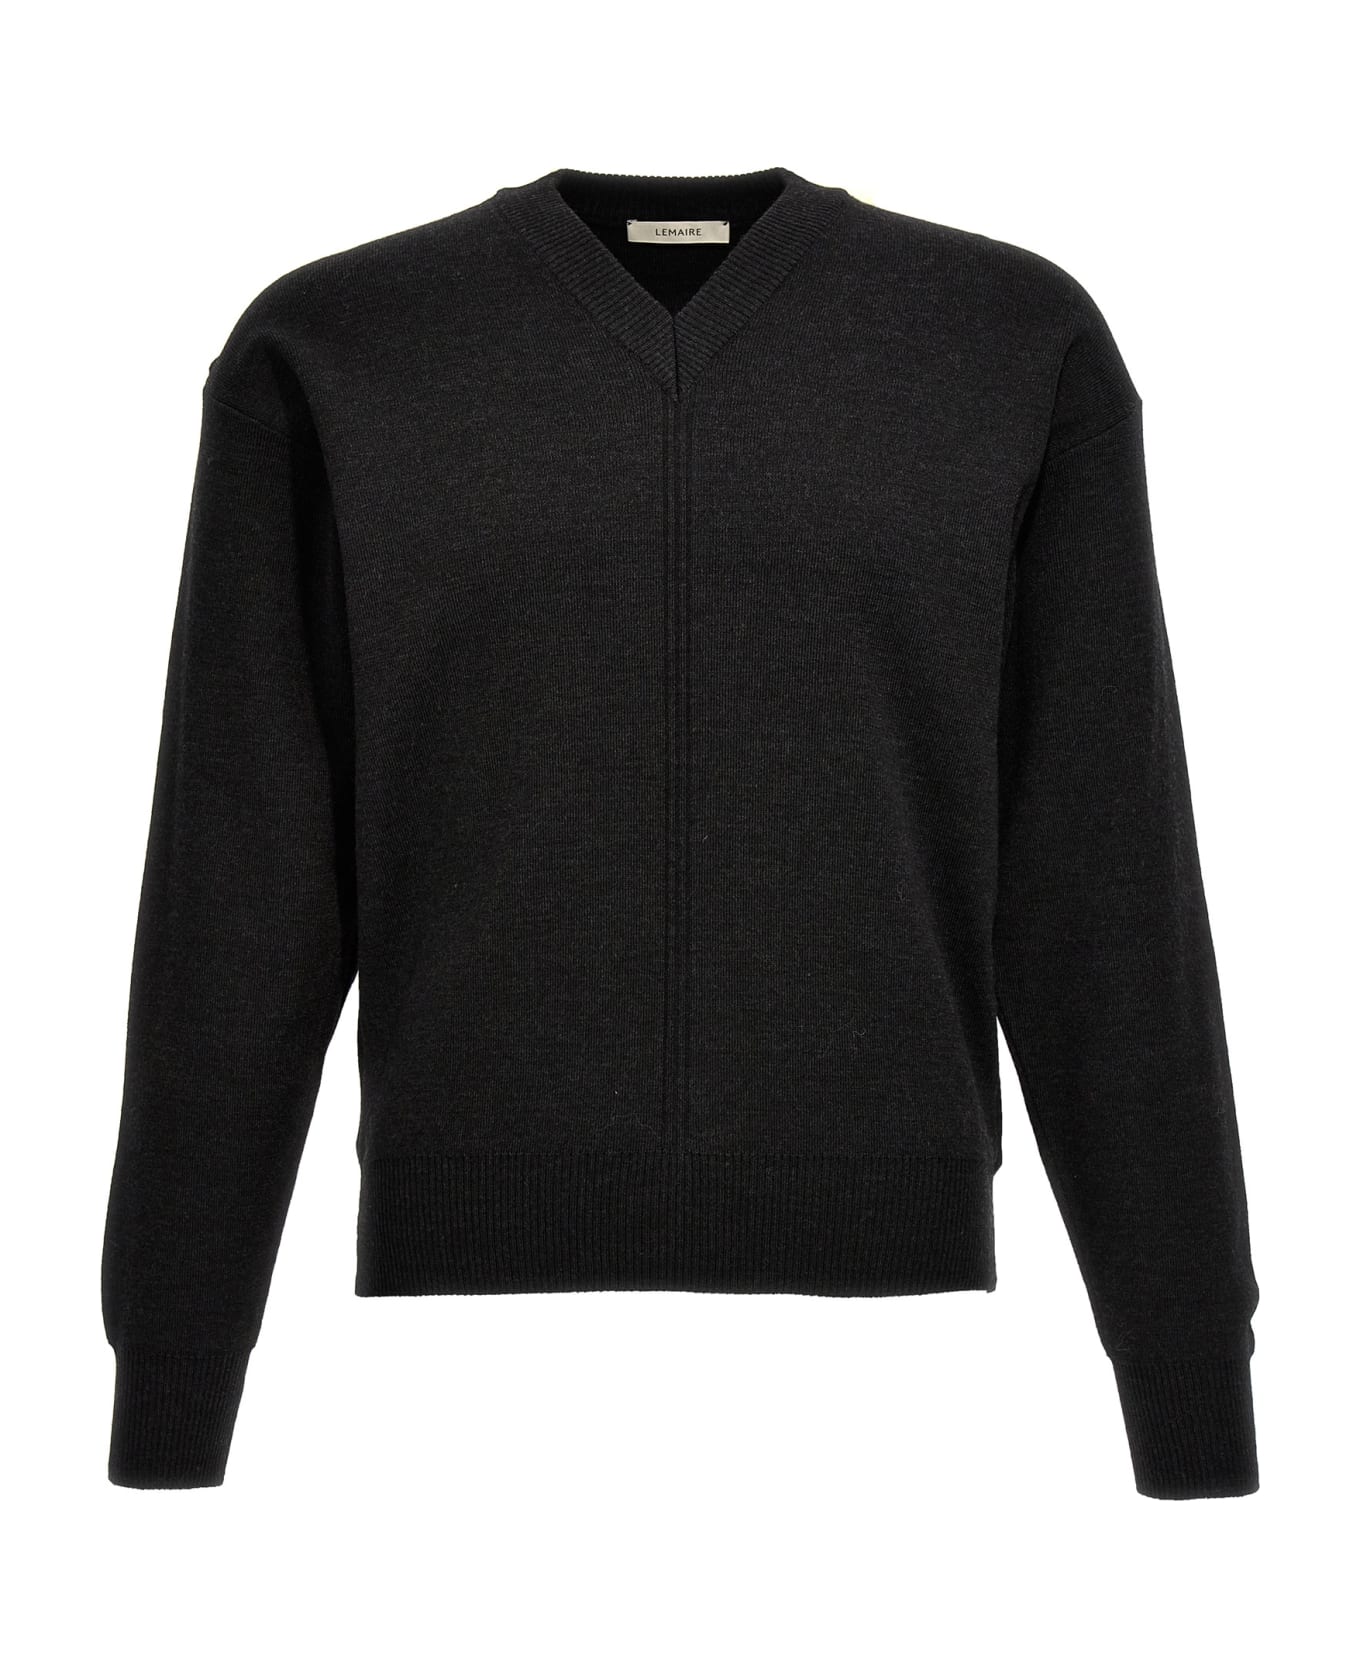 Lemaire V-neck Sweater - Antracite name:475